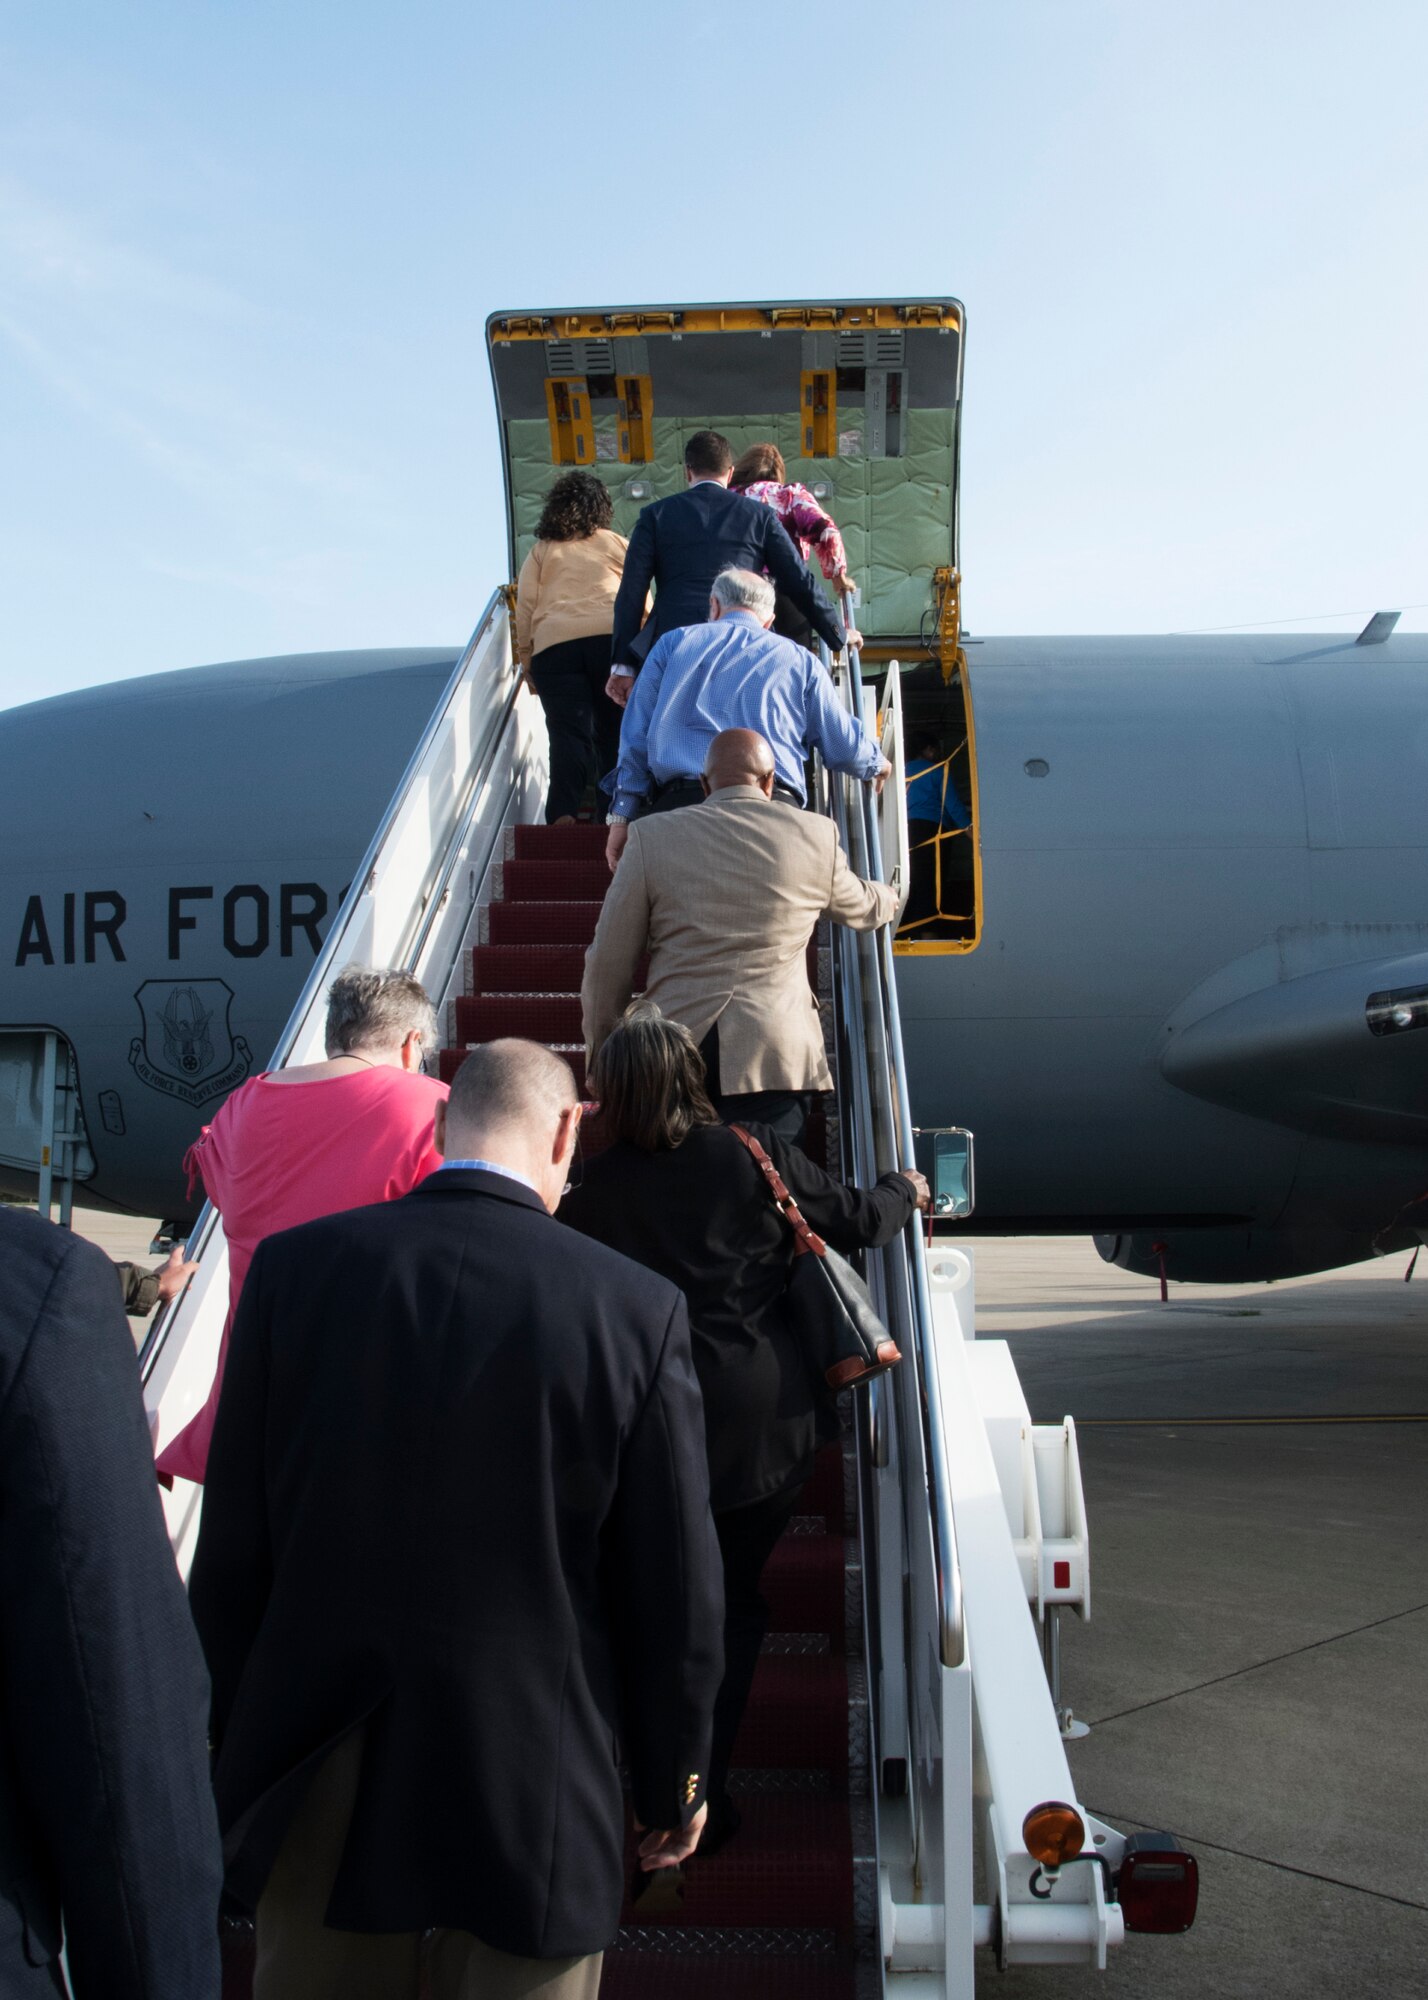 Members of Headquarters Air Force enter a KC-135 Stratotanker during a tour, Oct. 7, 2019 on Joint Base Andrews, Md. The team was briefed on the KC-135 and given a tour of the aircraft. (U.S. Air Force photo by Staff Sgt. Cierra Presentado/Released)